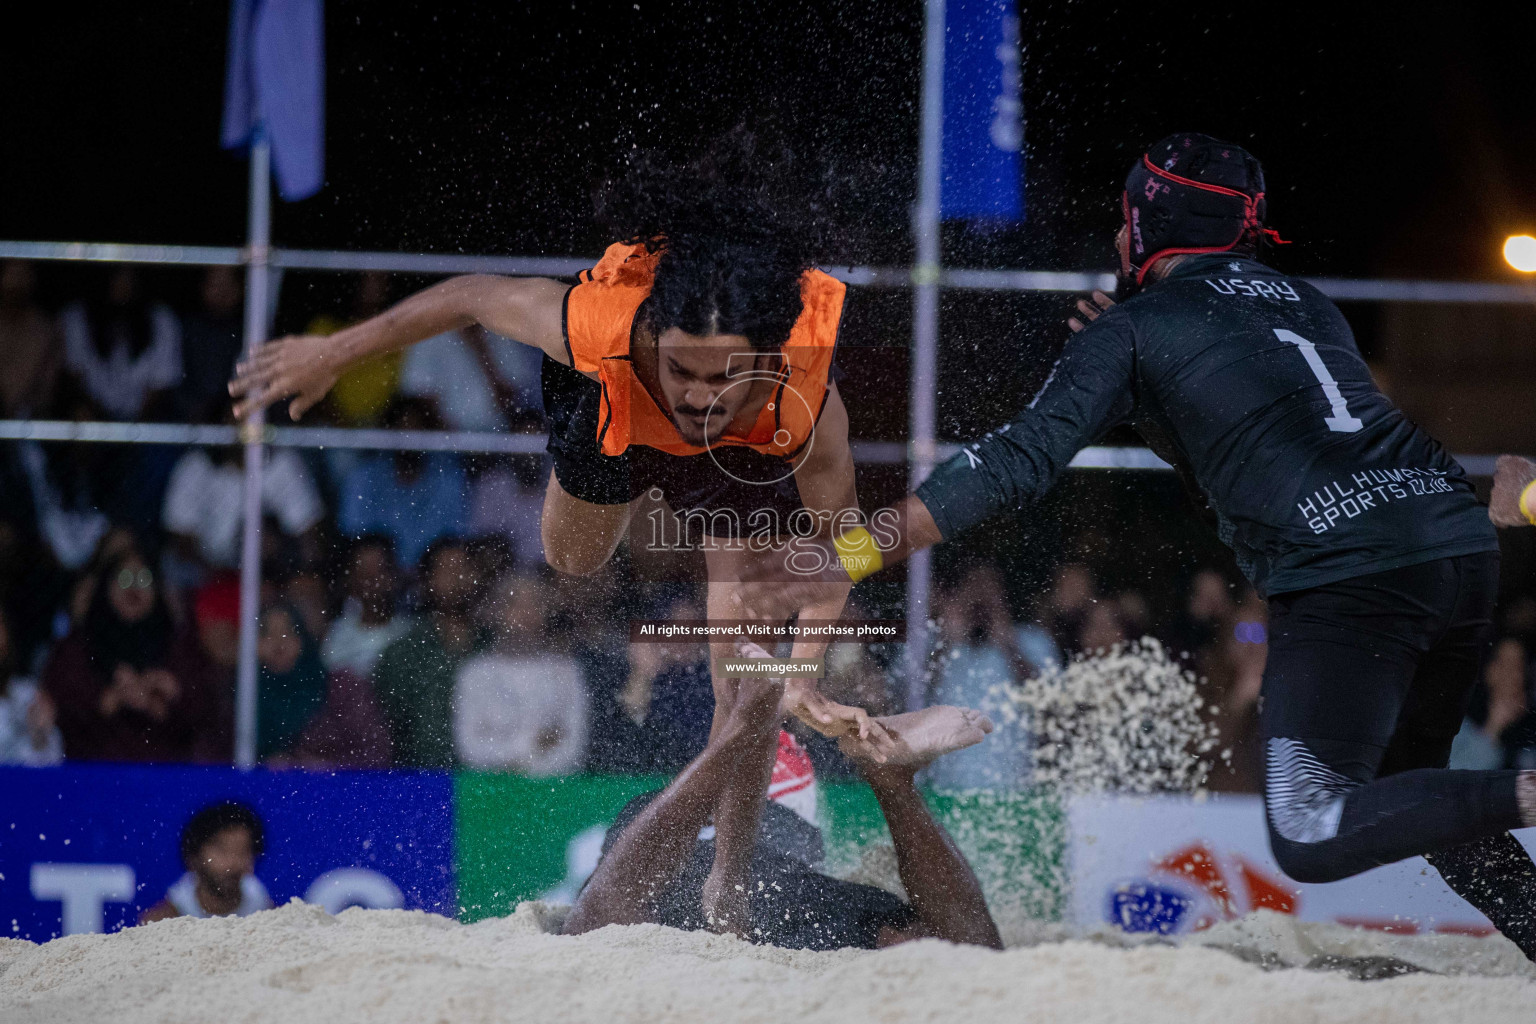 Semi and Finals of Eid Baibalaa 1444 held in Male', Maldives on 28th April 2023 Photos by Shuu & Nausham/ Images mv